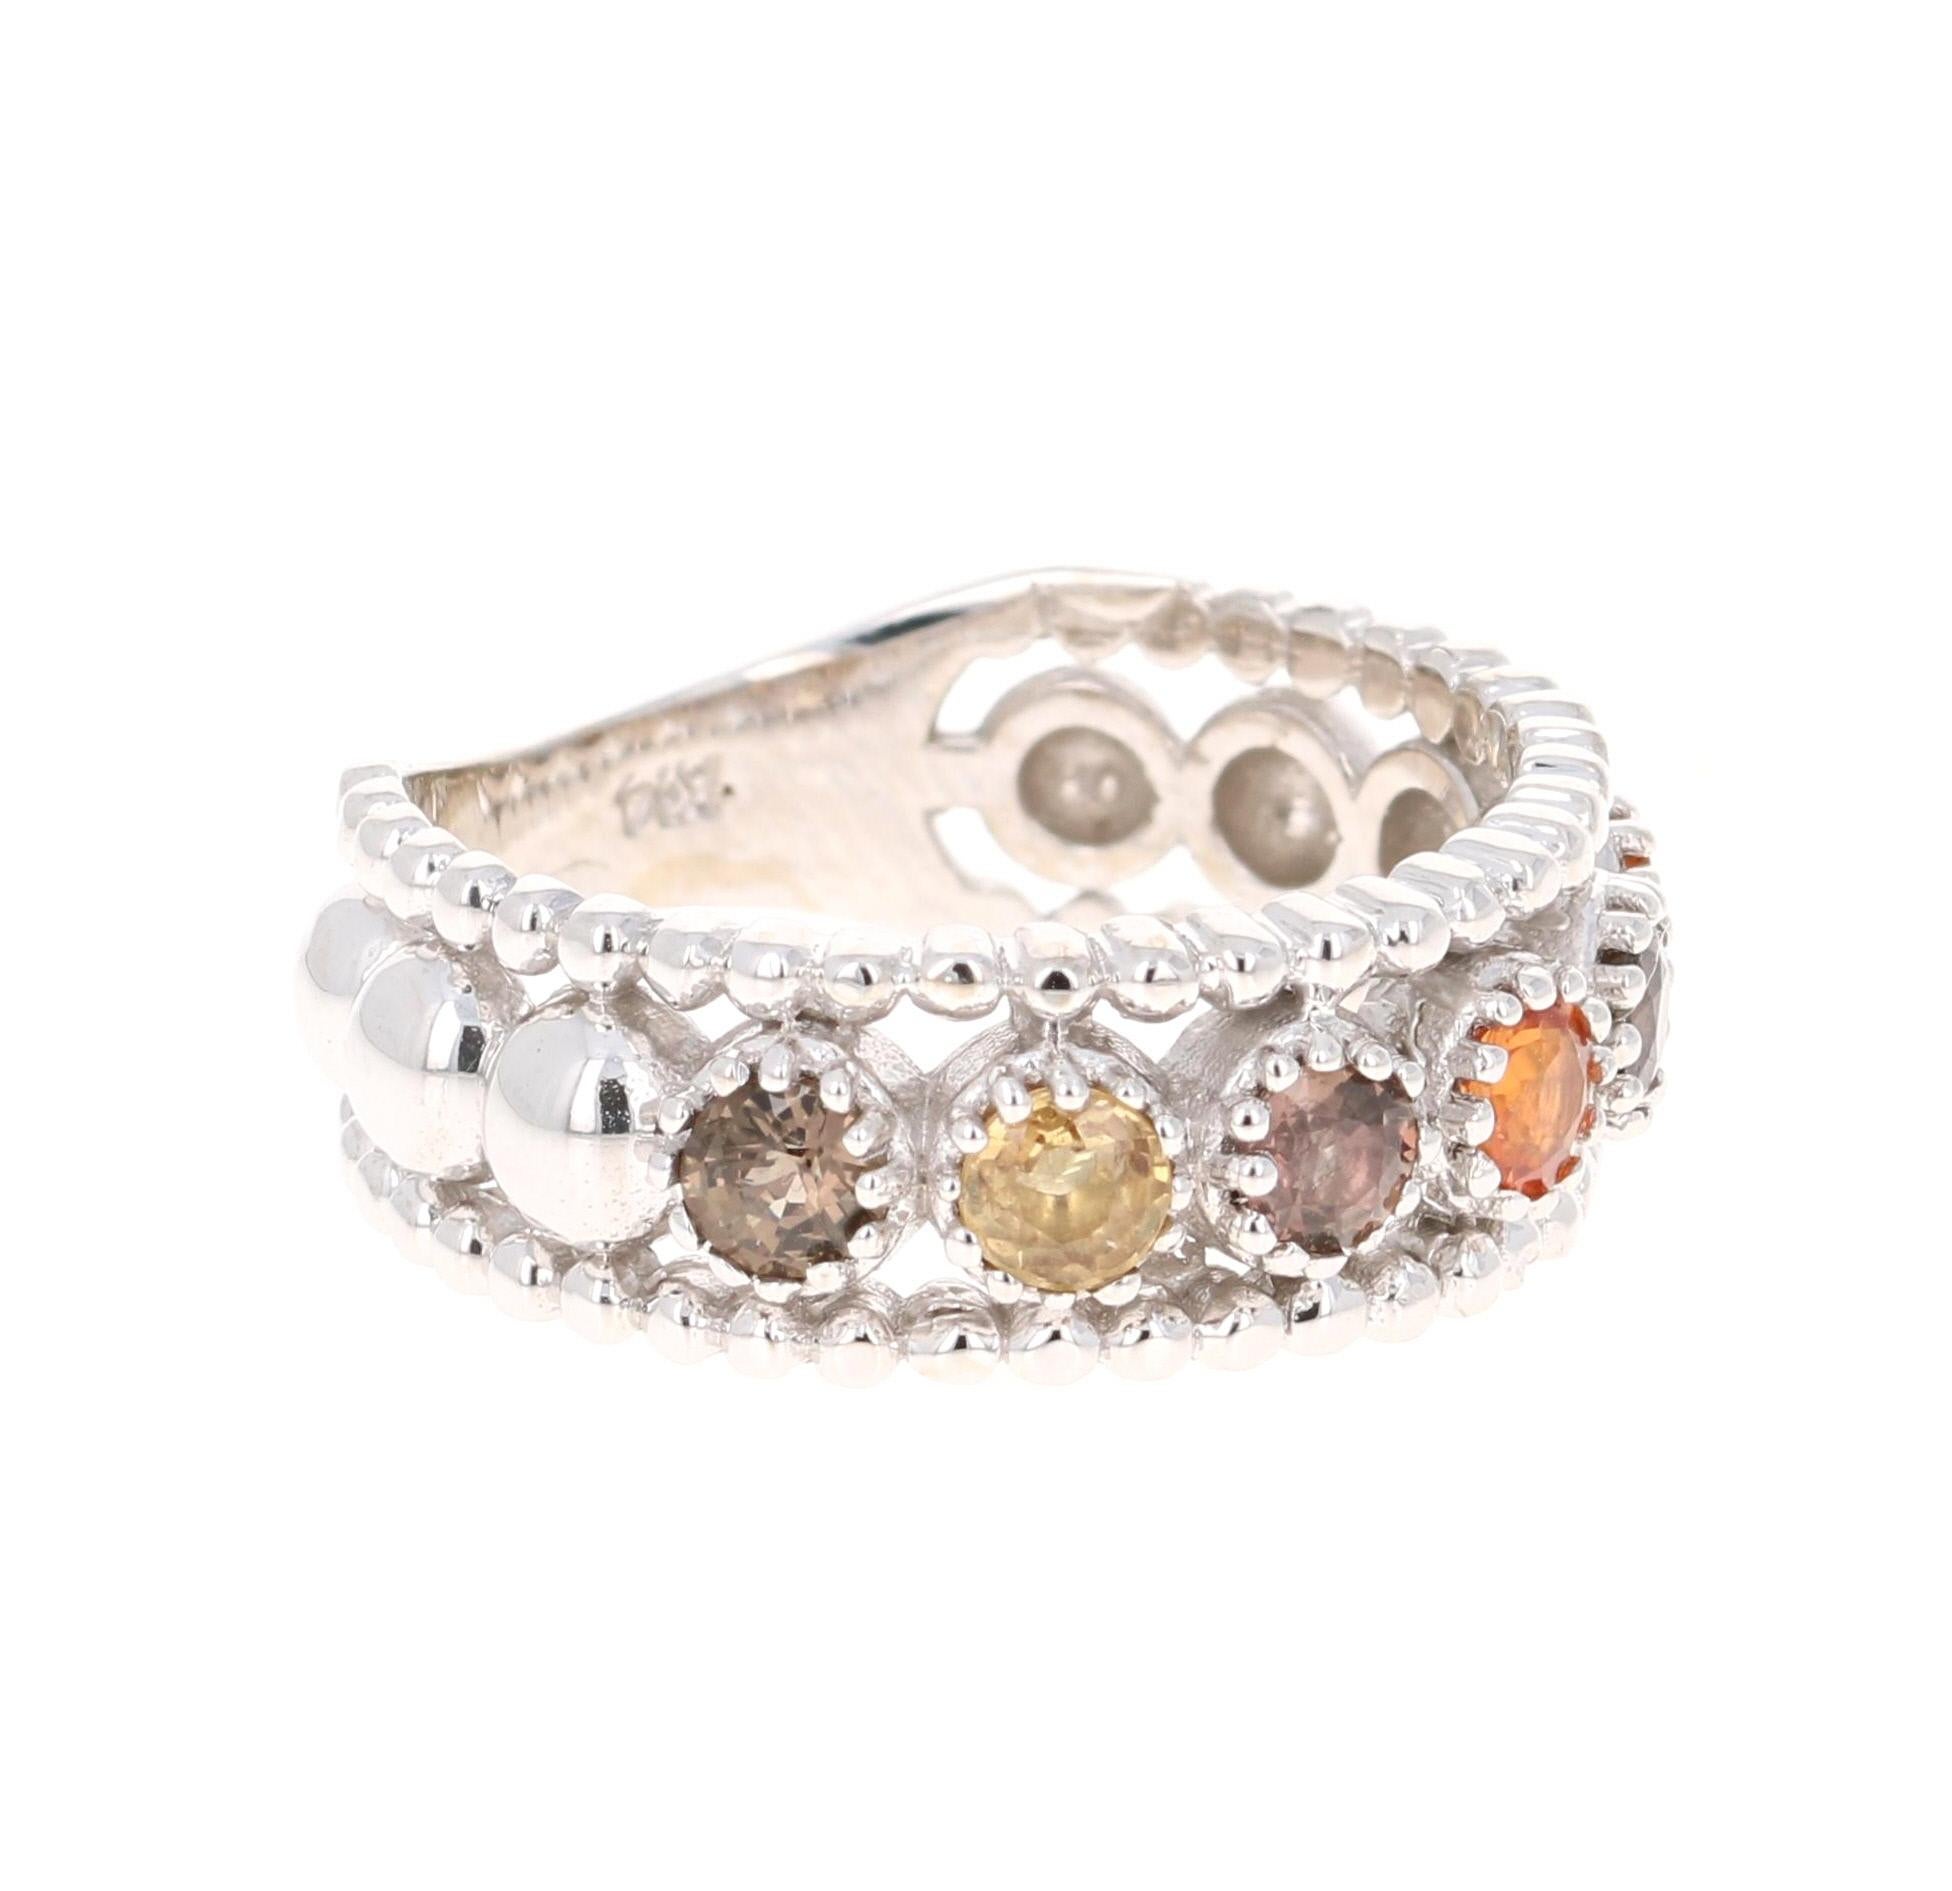 A Uniquely designed Multi Color Sapphire Band that is sure to be a great addition to your jewelry collection!  
This band has 6 Round Cut Multi-Colored Sapphires with hues of Yellow and Pink that weigh 1.06 carats.  

The ring is made in 14K White